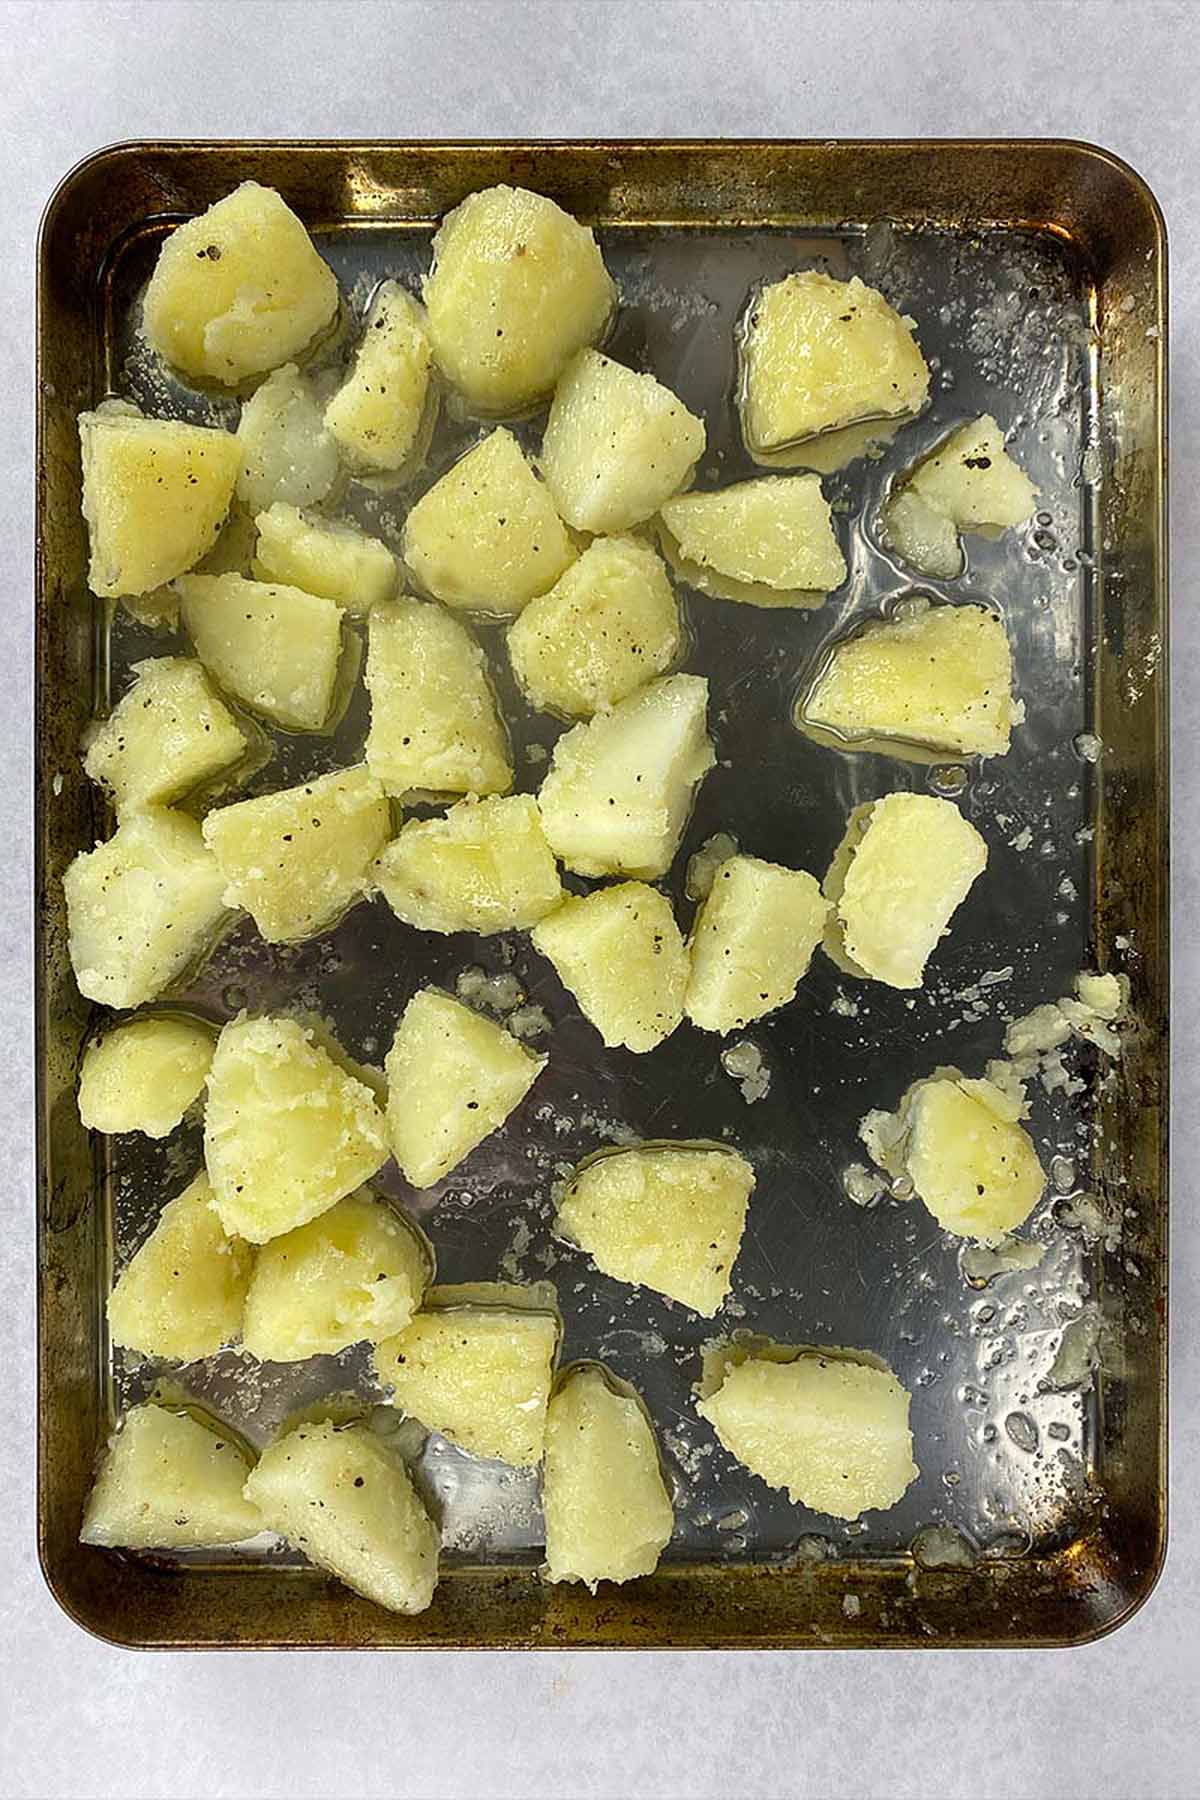 Boiled potatoes spread over a large baking sheet.